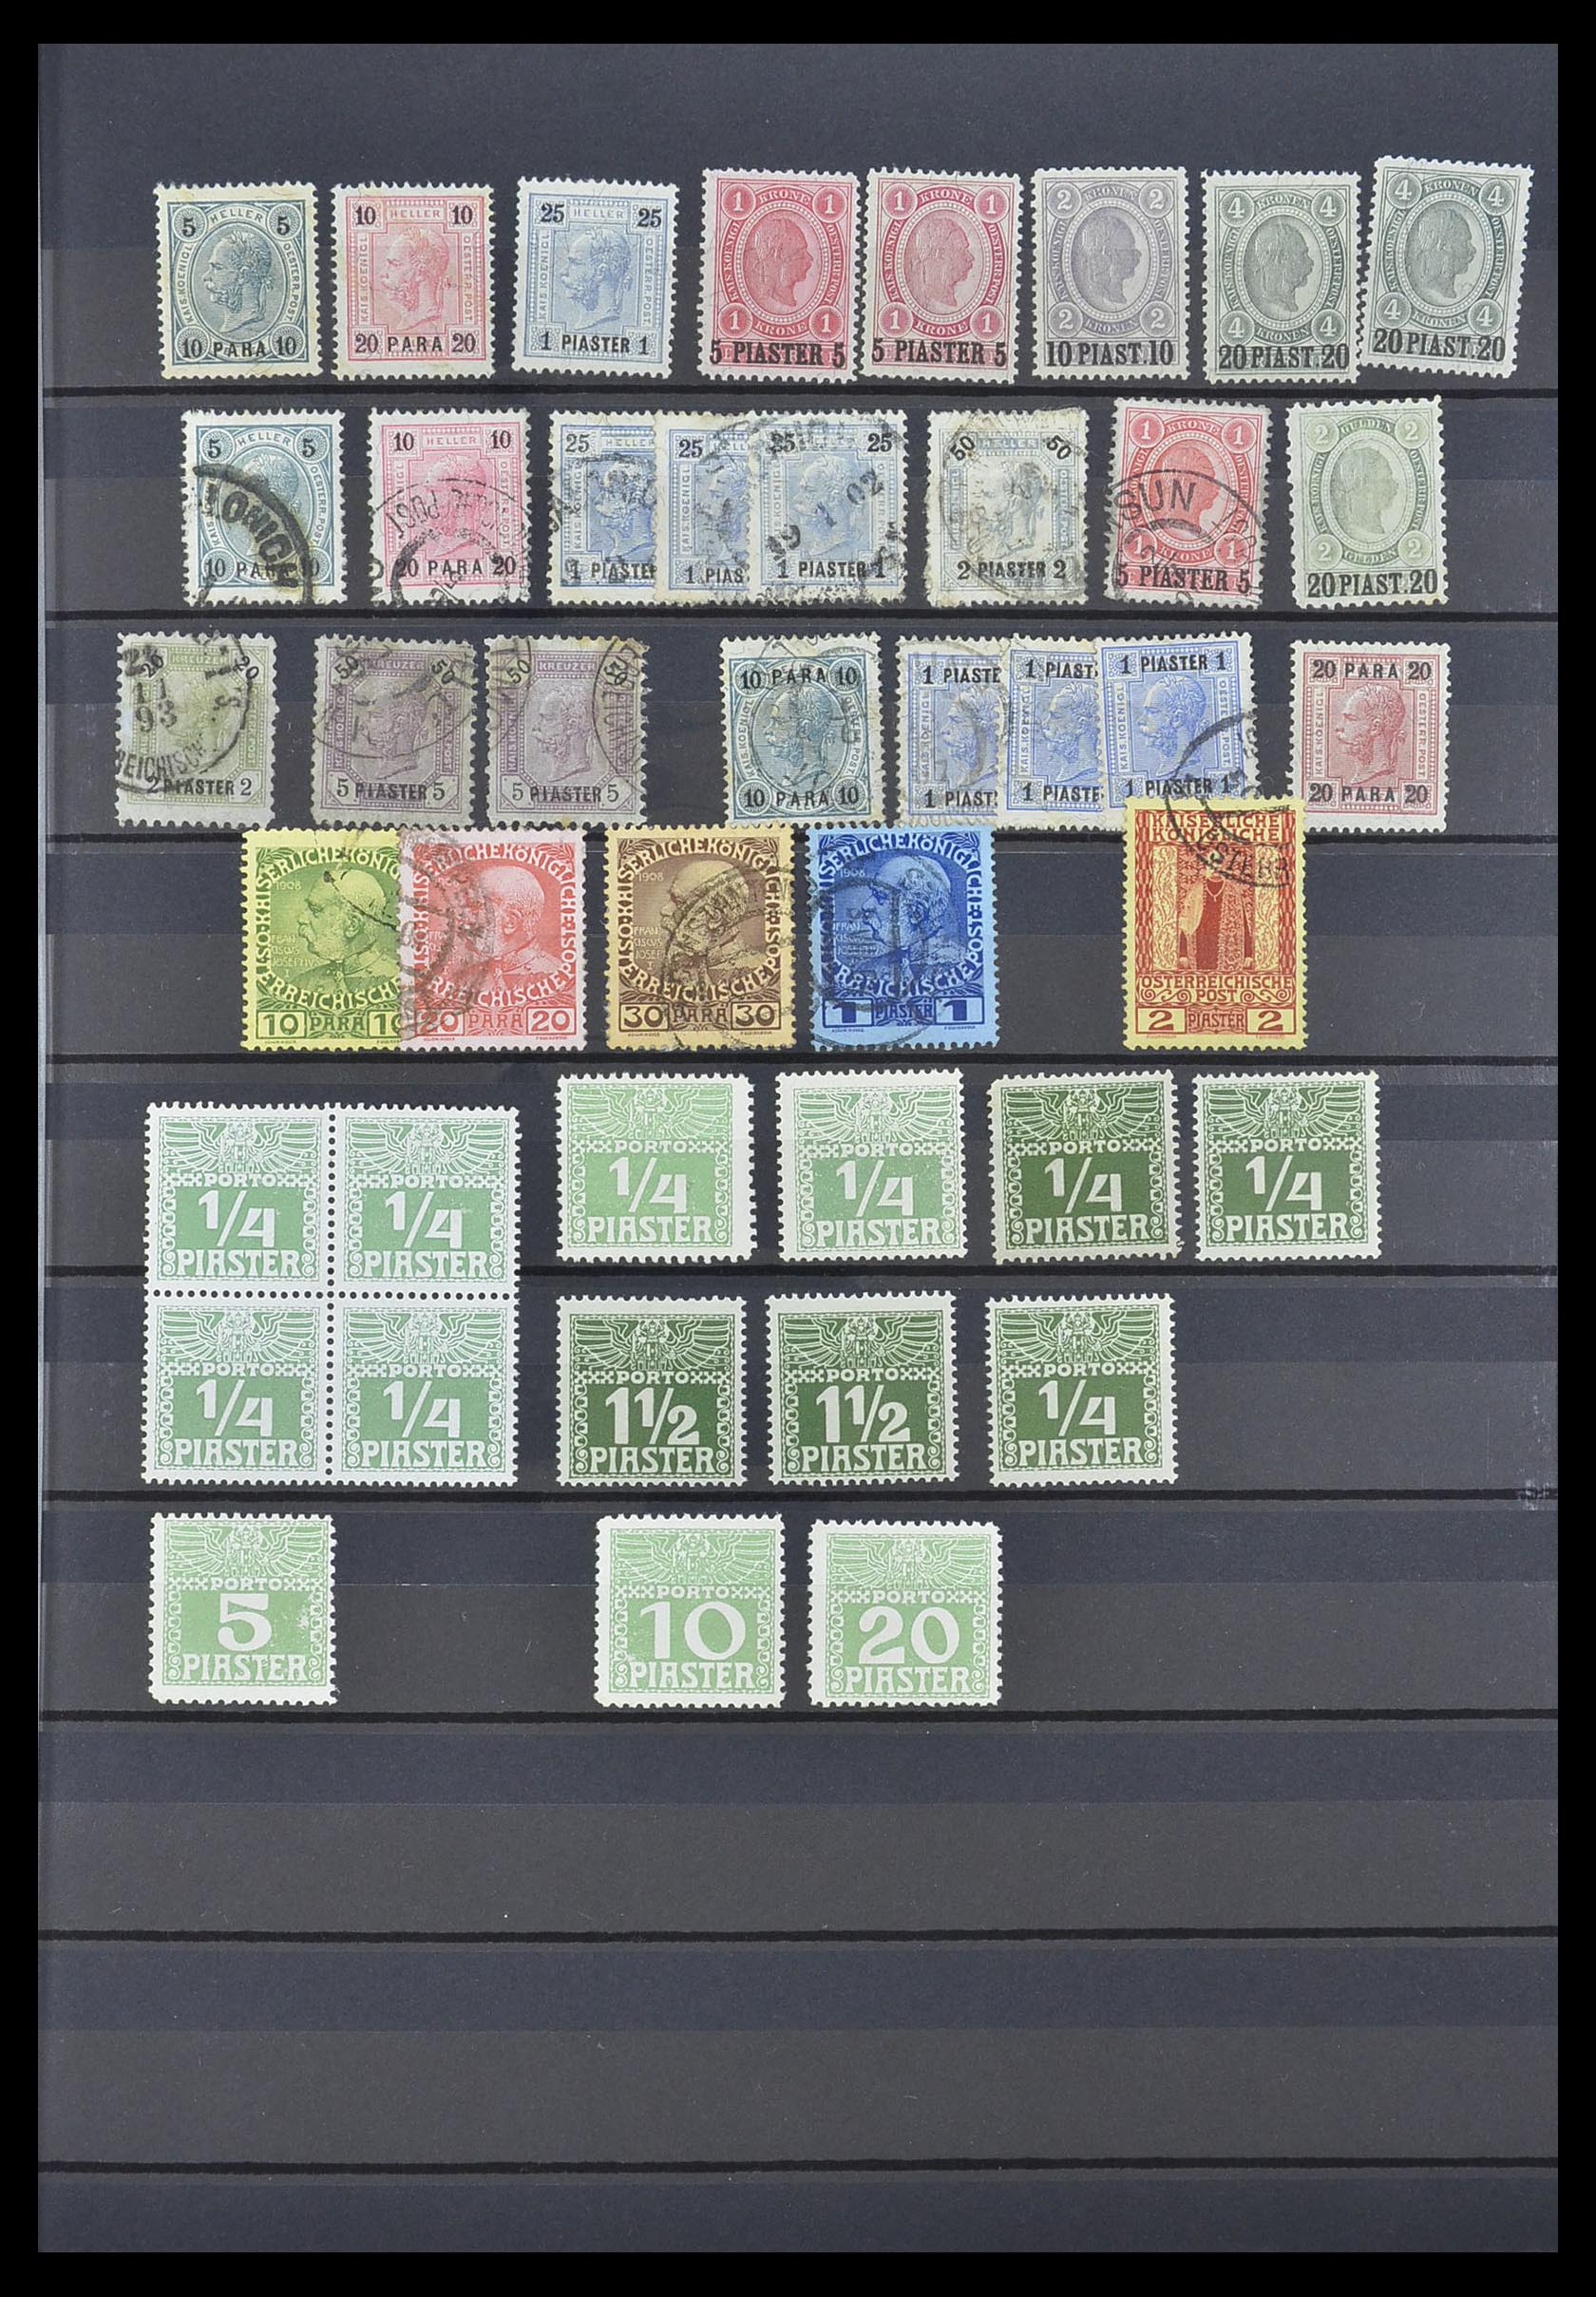 33756 033 - Stamp collection 33756 World classic 1850-1930.